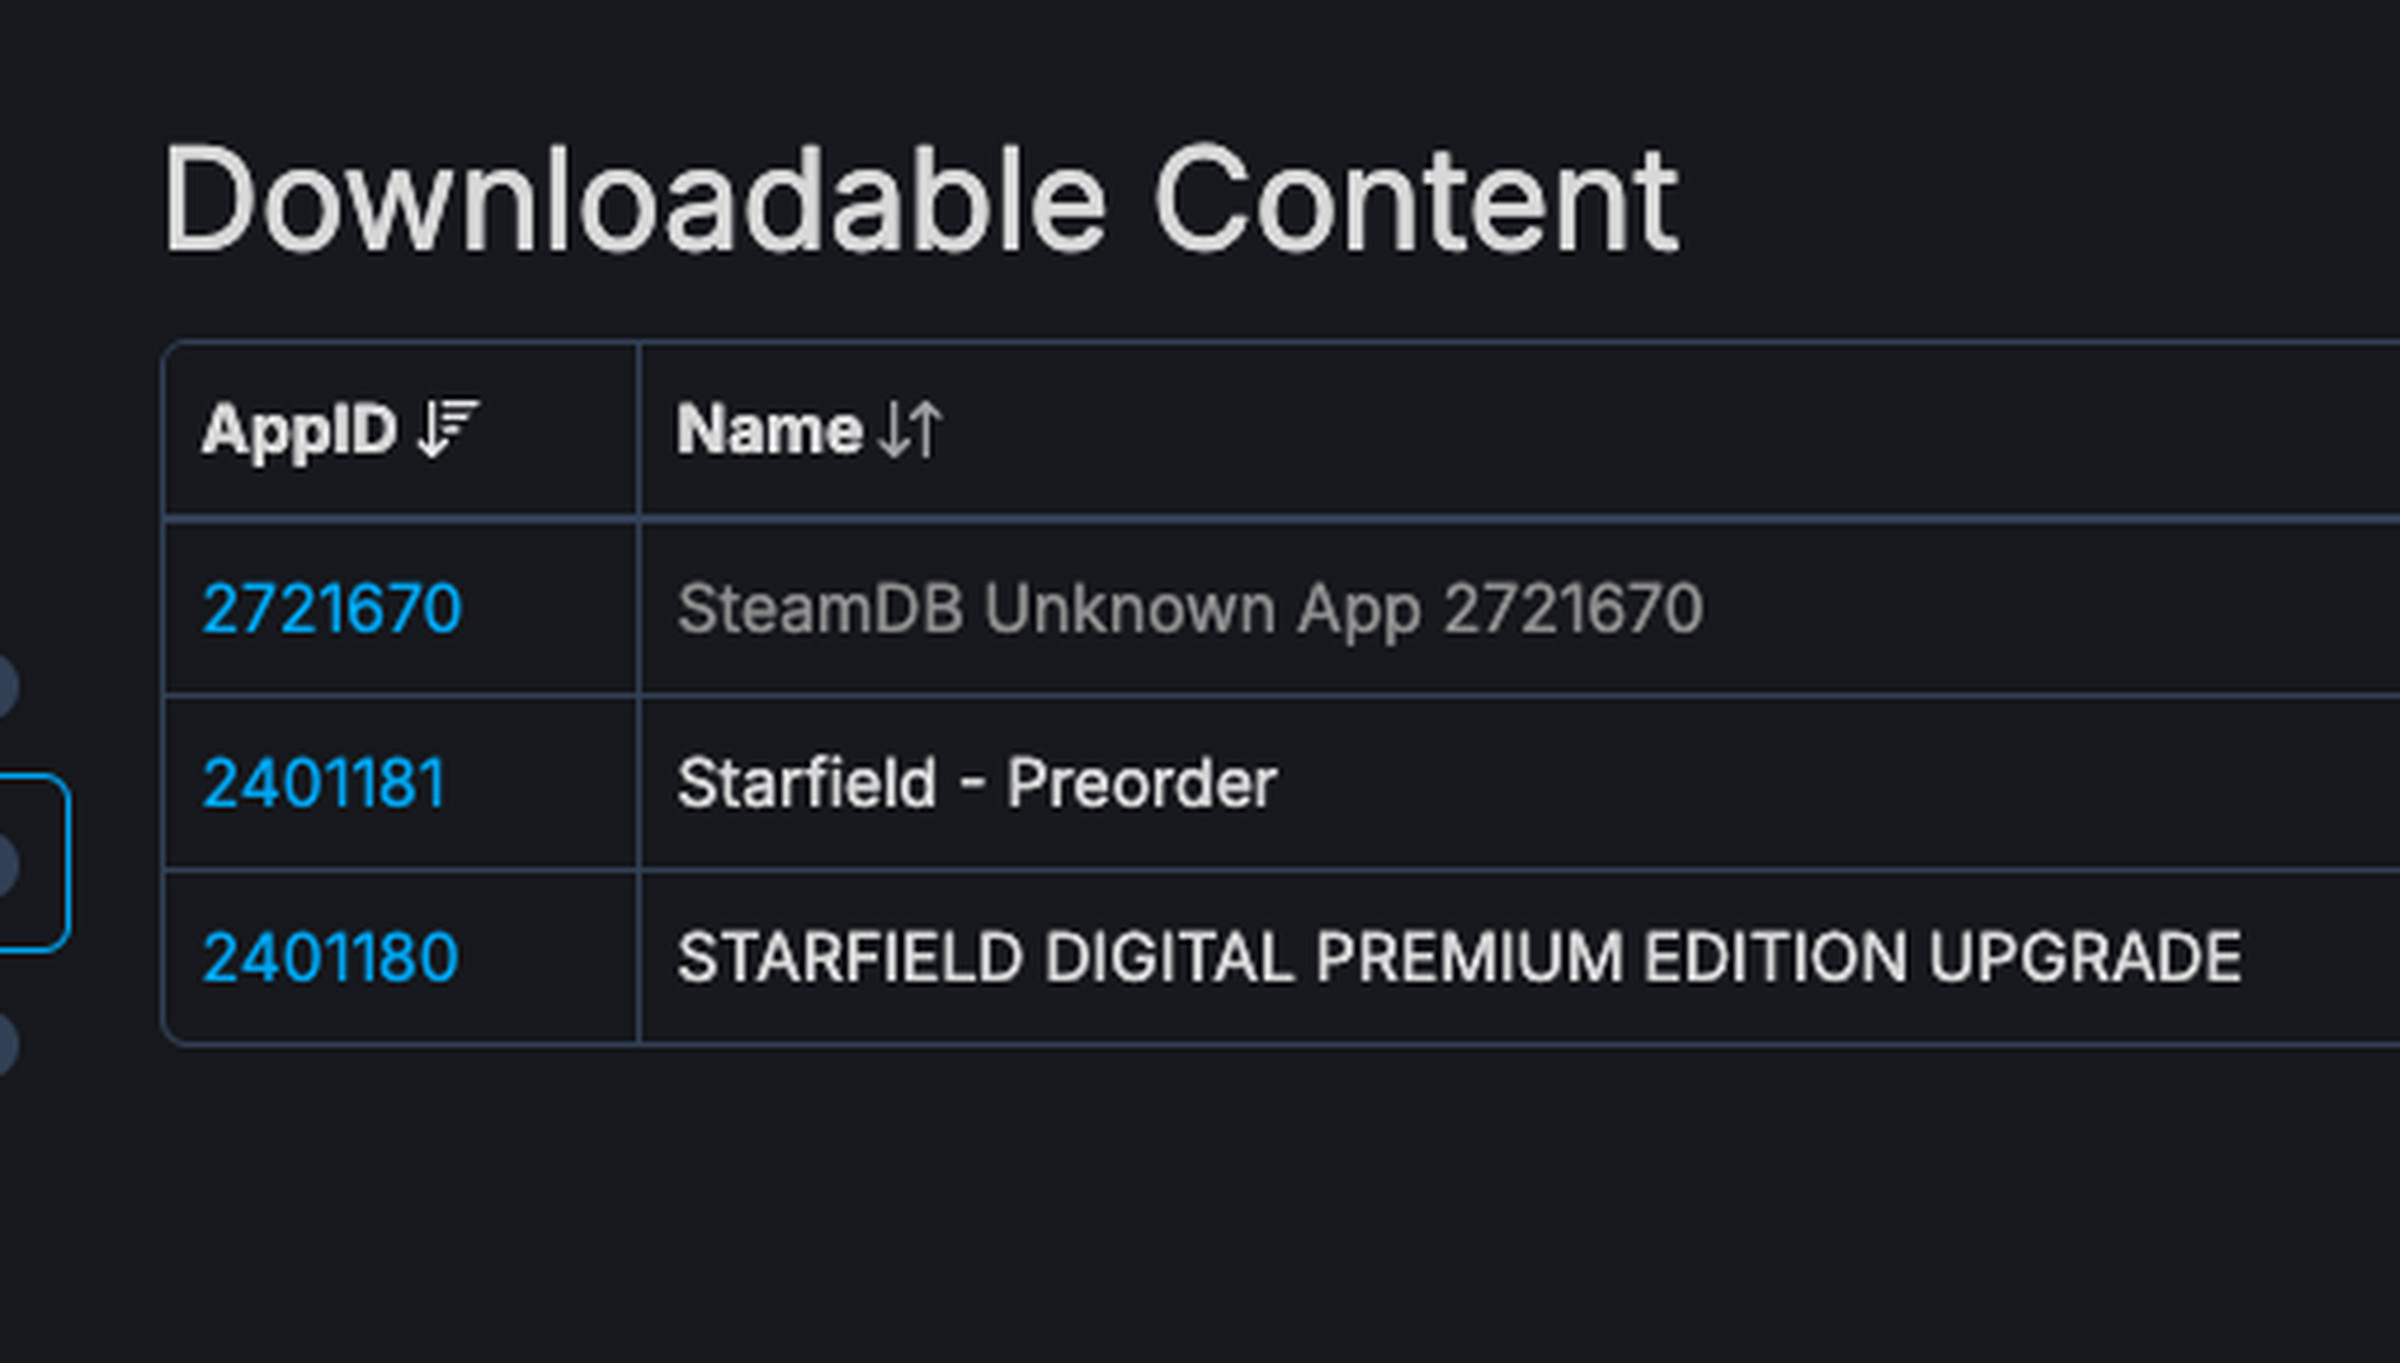 A screenshot of downloadable content for Starfield from SteamDB.